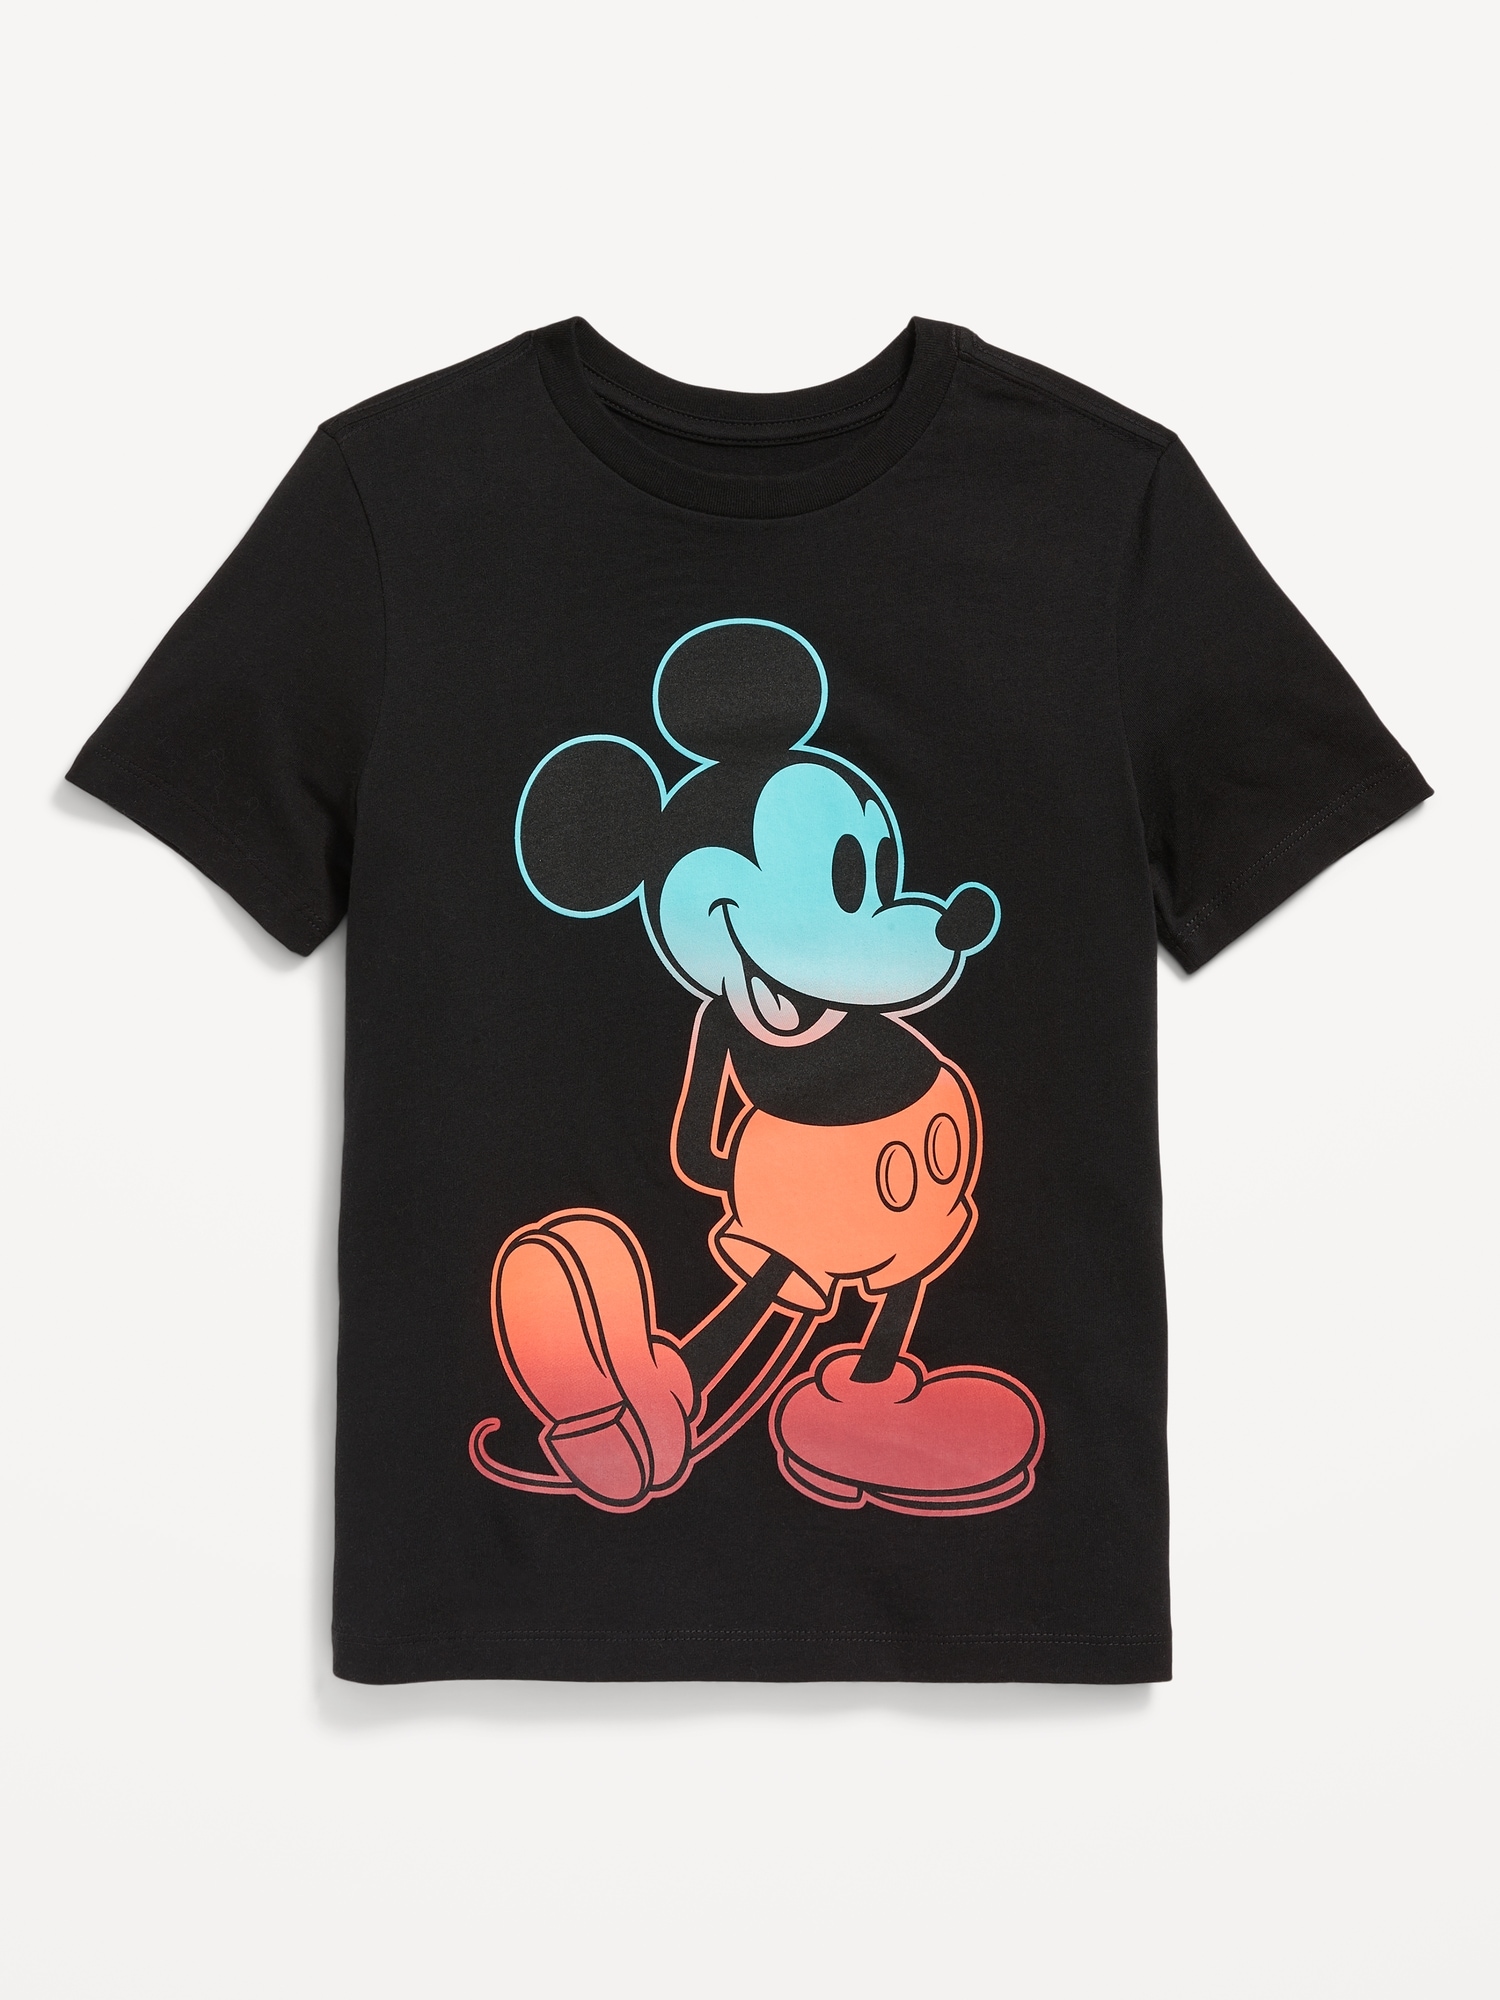 Disney Mickey Mouse Gender-Neutral Graphic T-Shirt for Kids